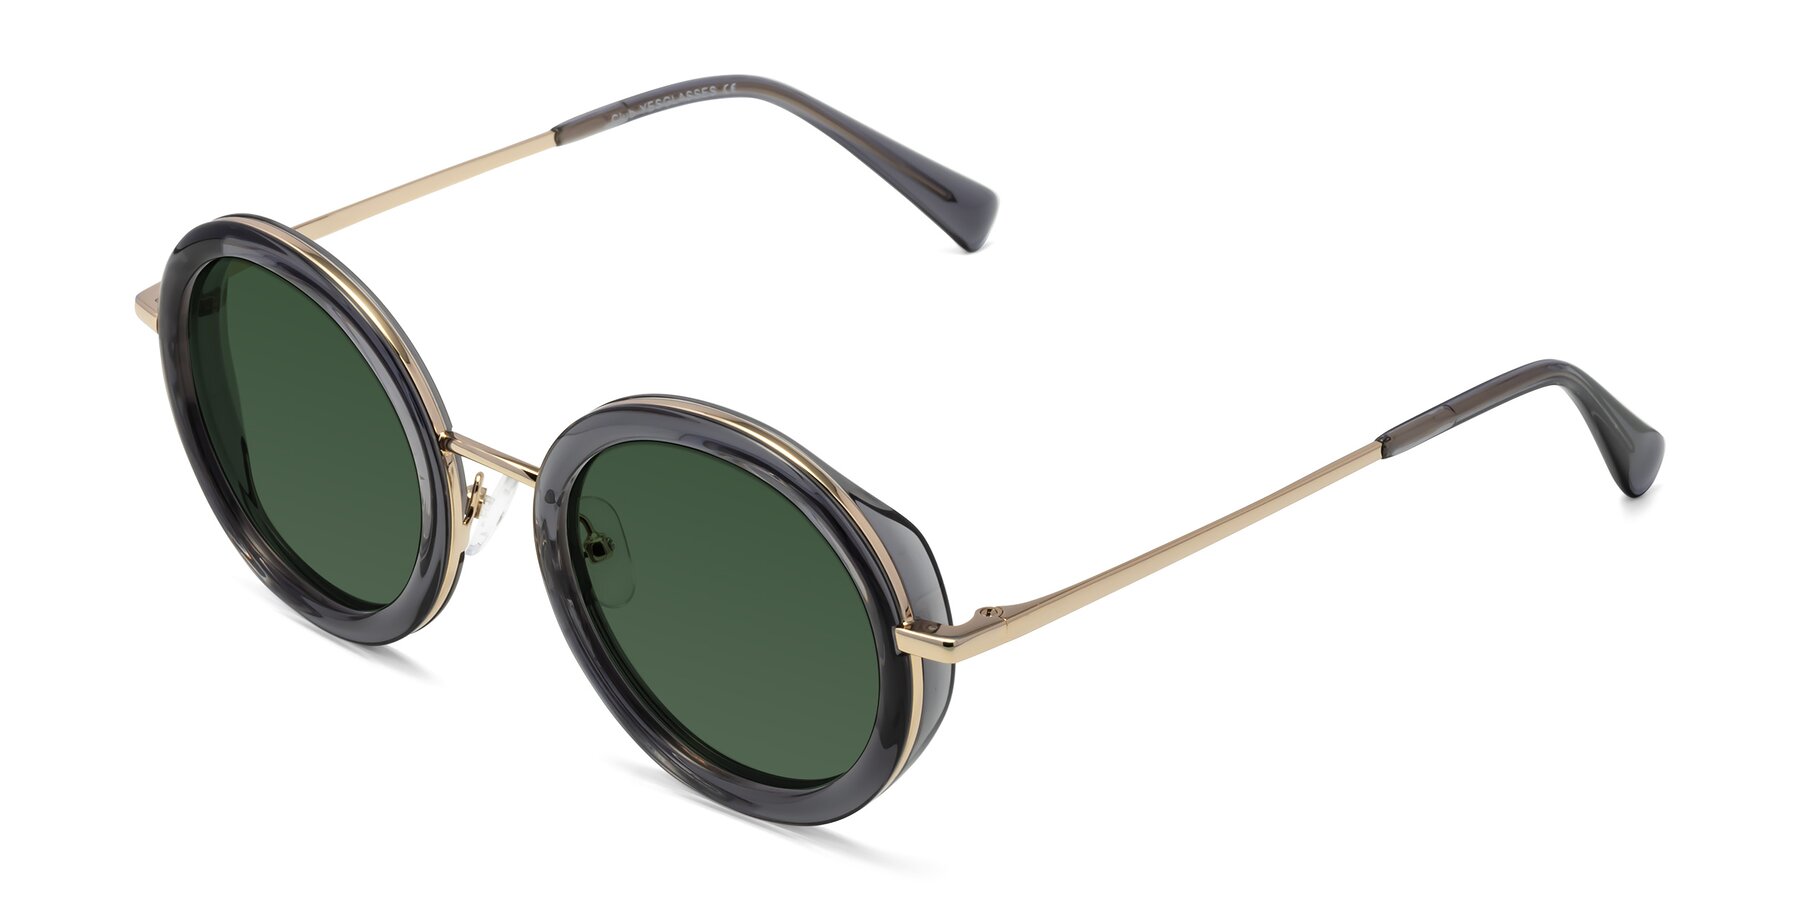 Angle of Club in Gray-Gold with Green Tinted Lenses